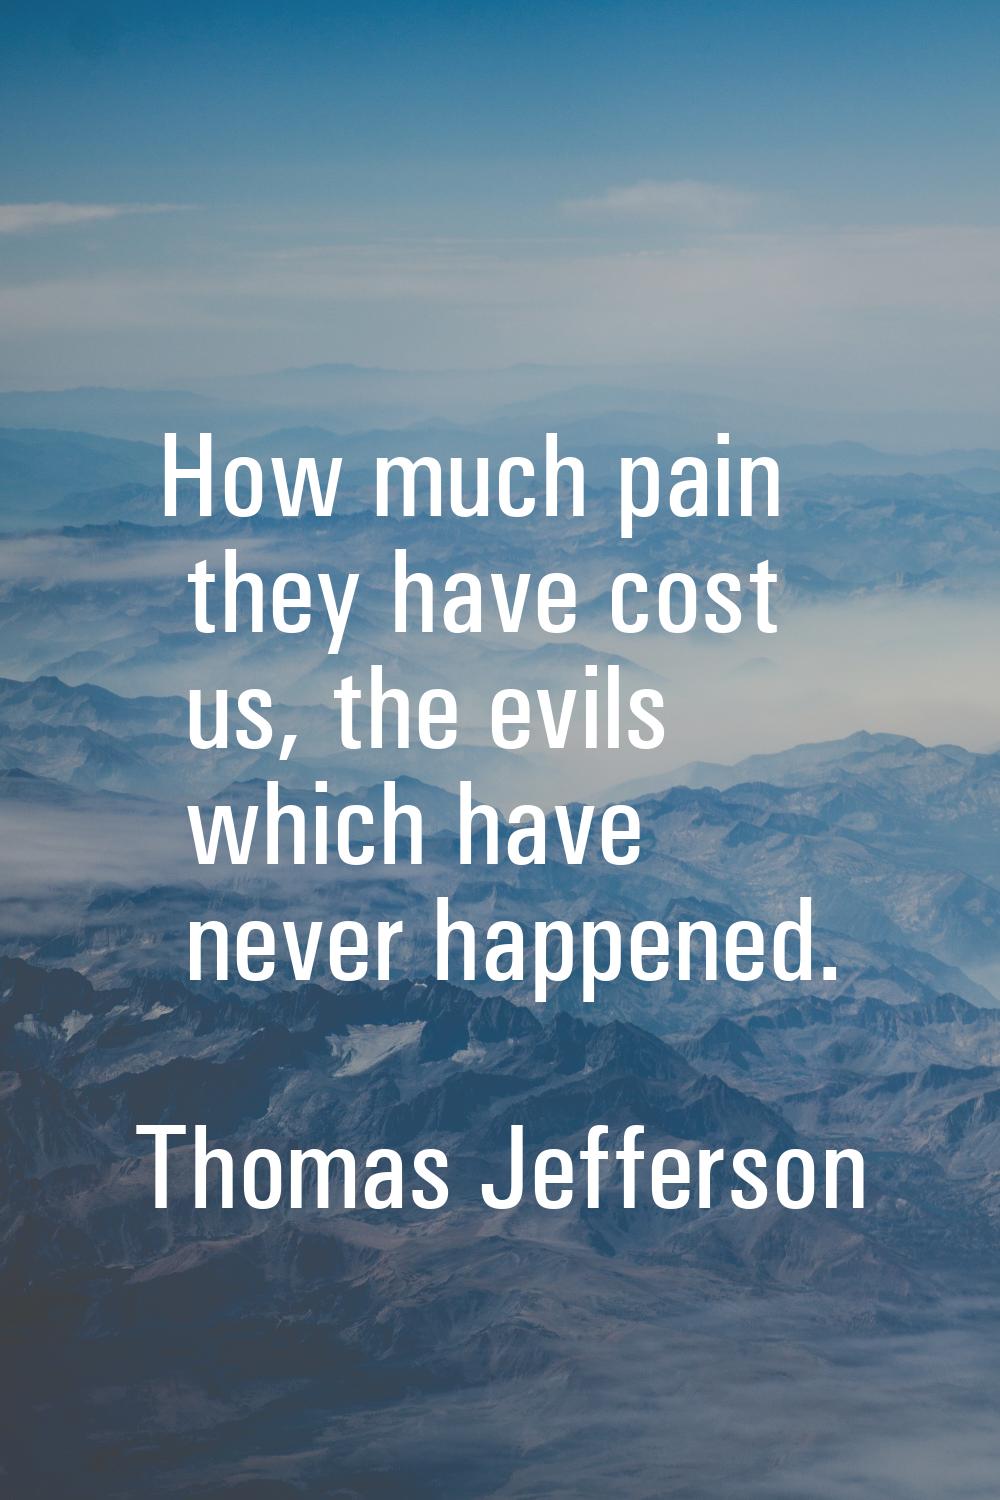 How much pain they have cost us, the evils which have never happened.